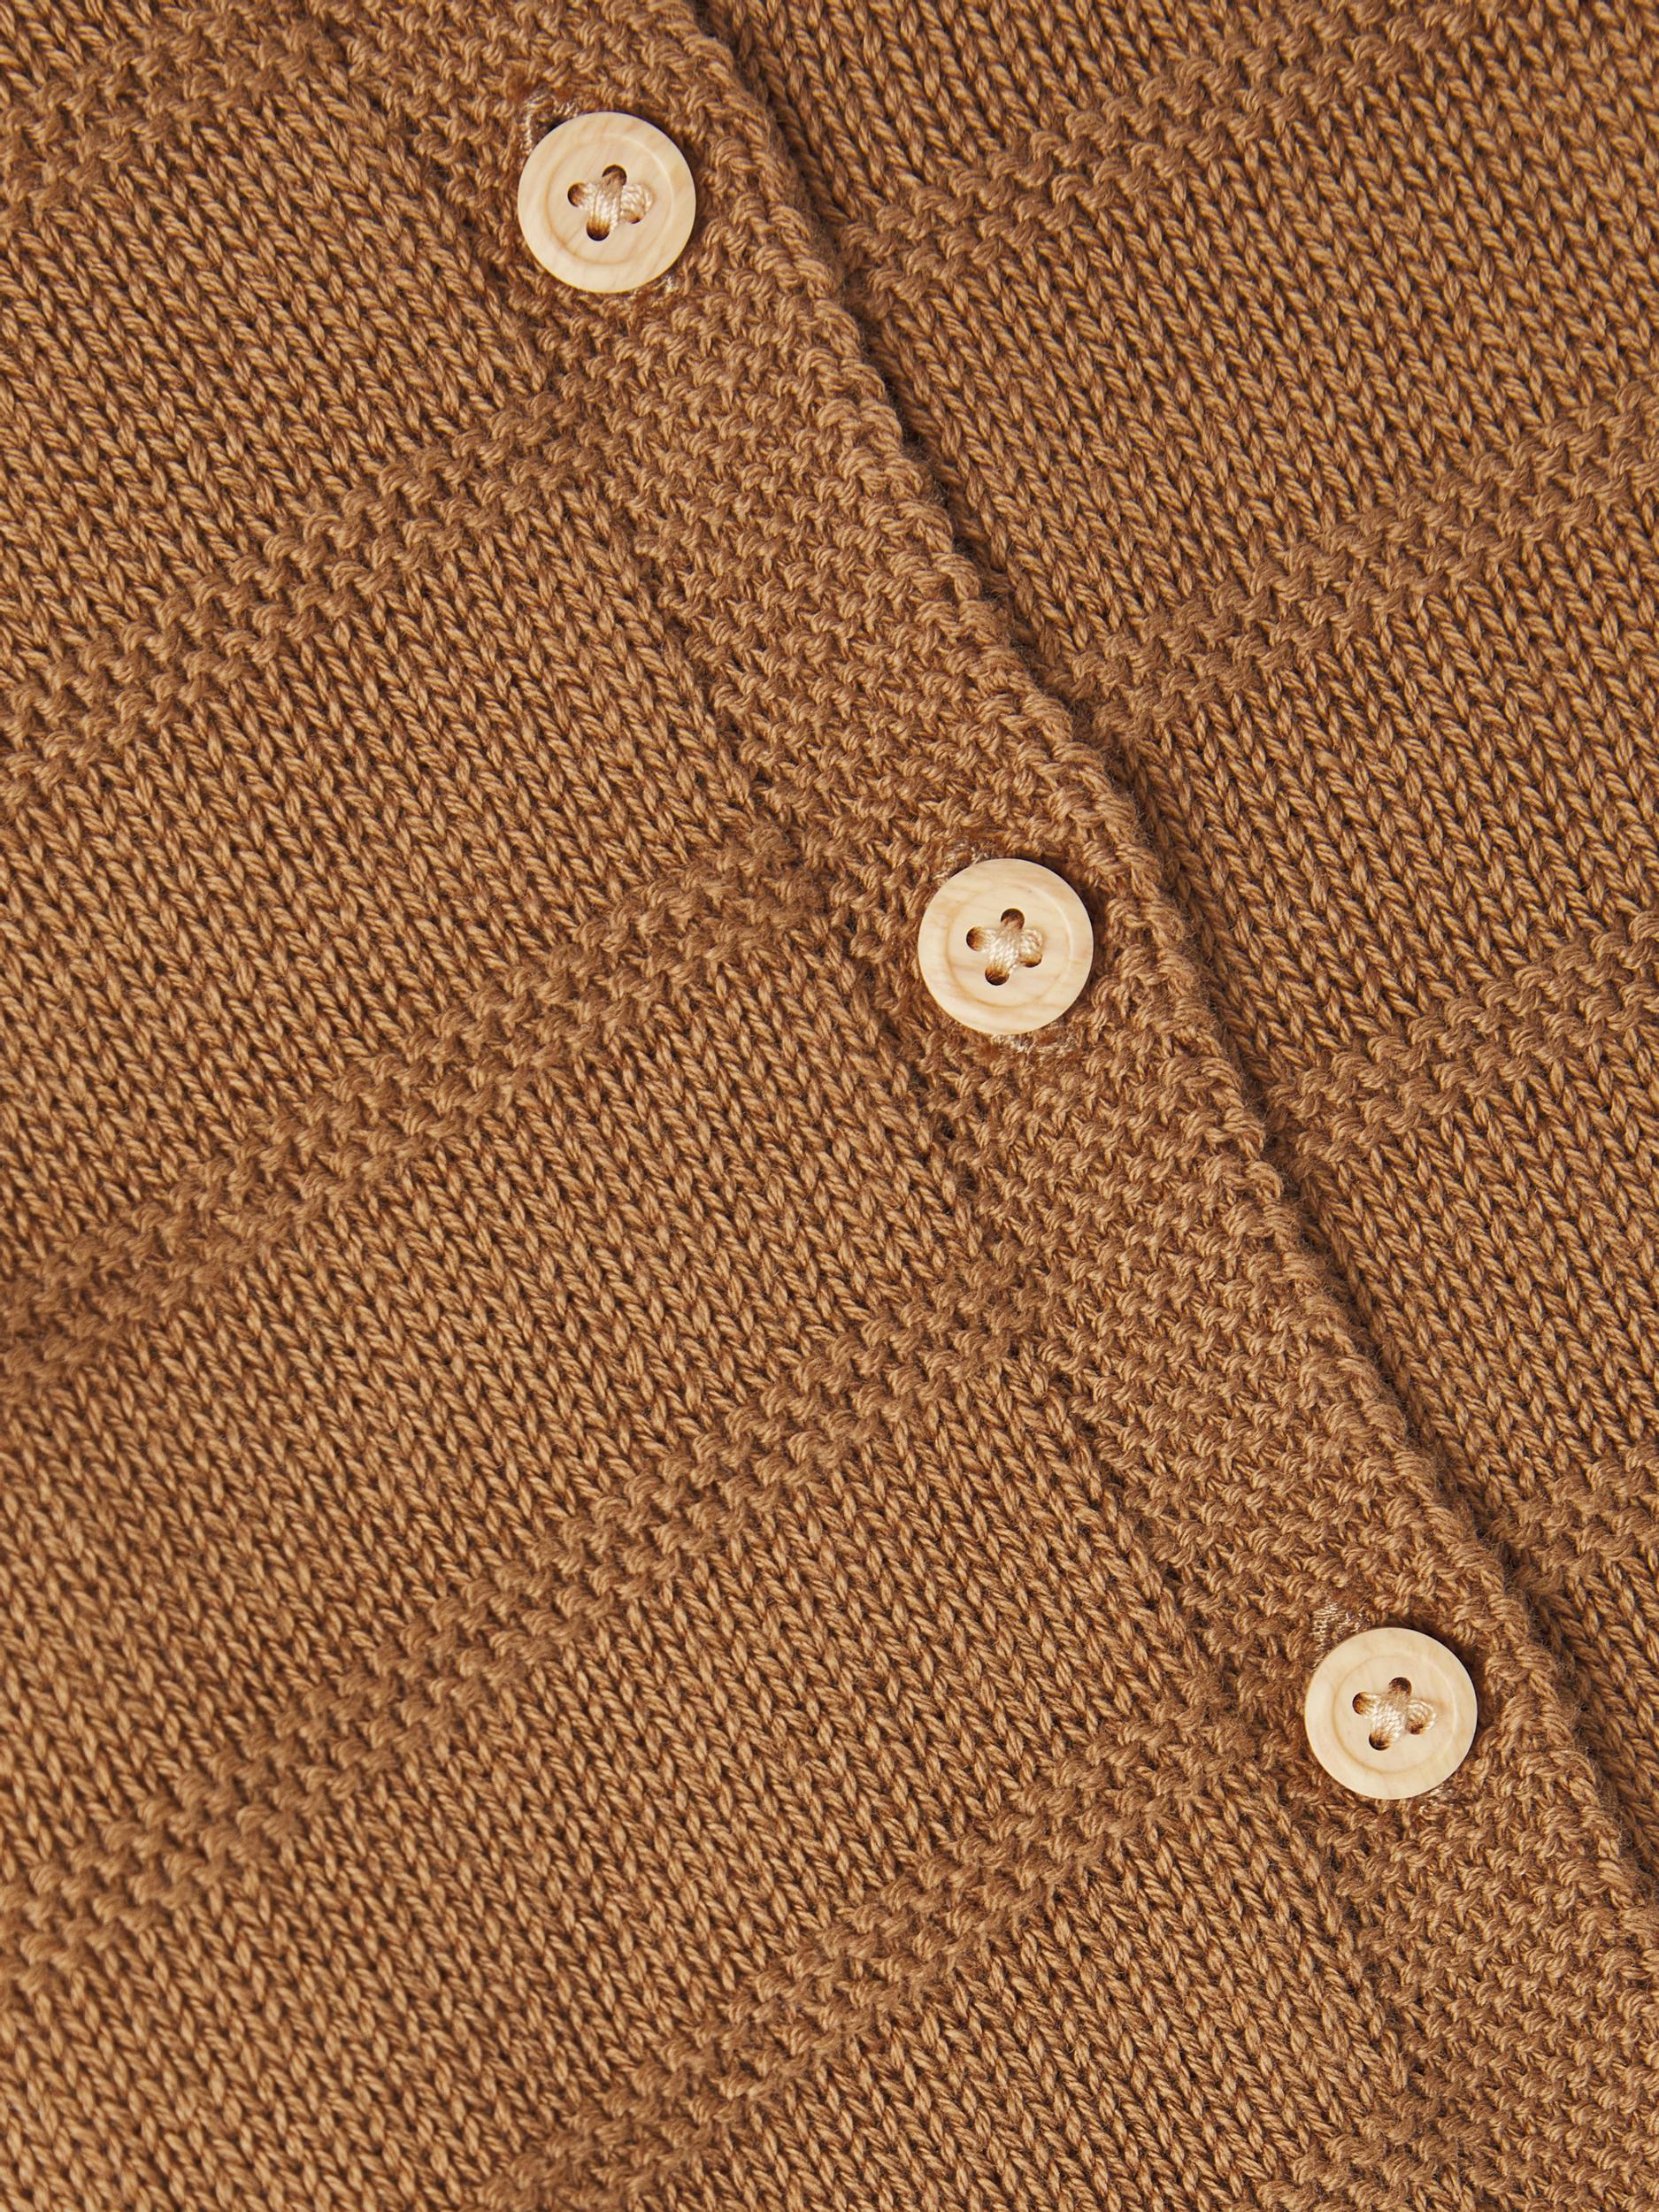 Boy's Toasted Coconut Bolan Long Sleeve Knit Cardigan-Close Up View